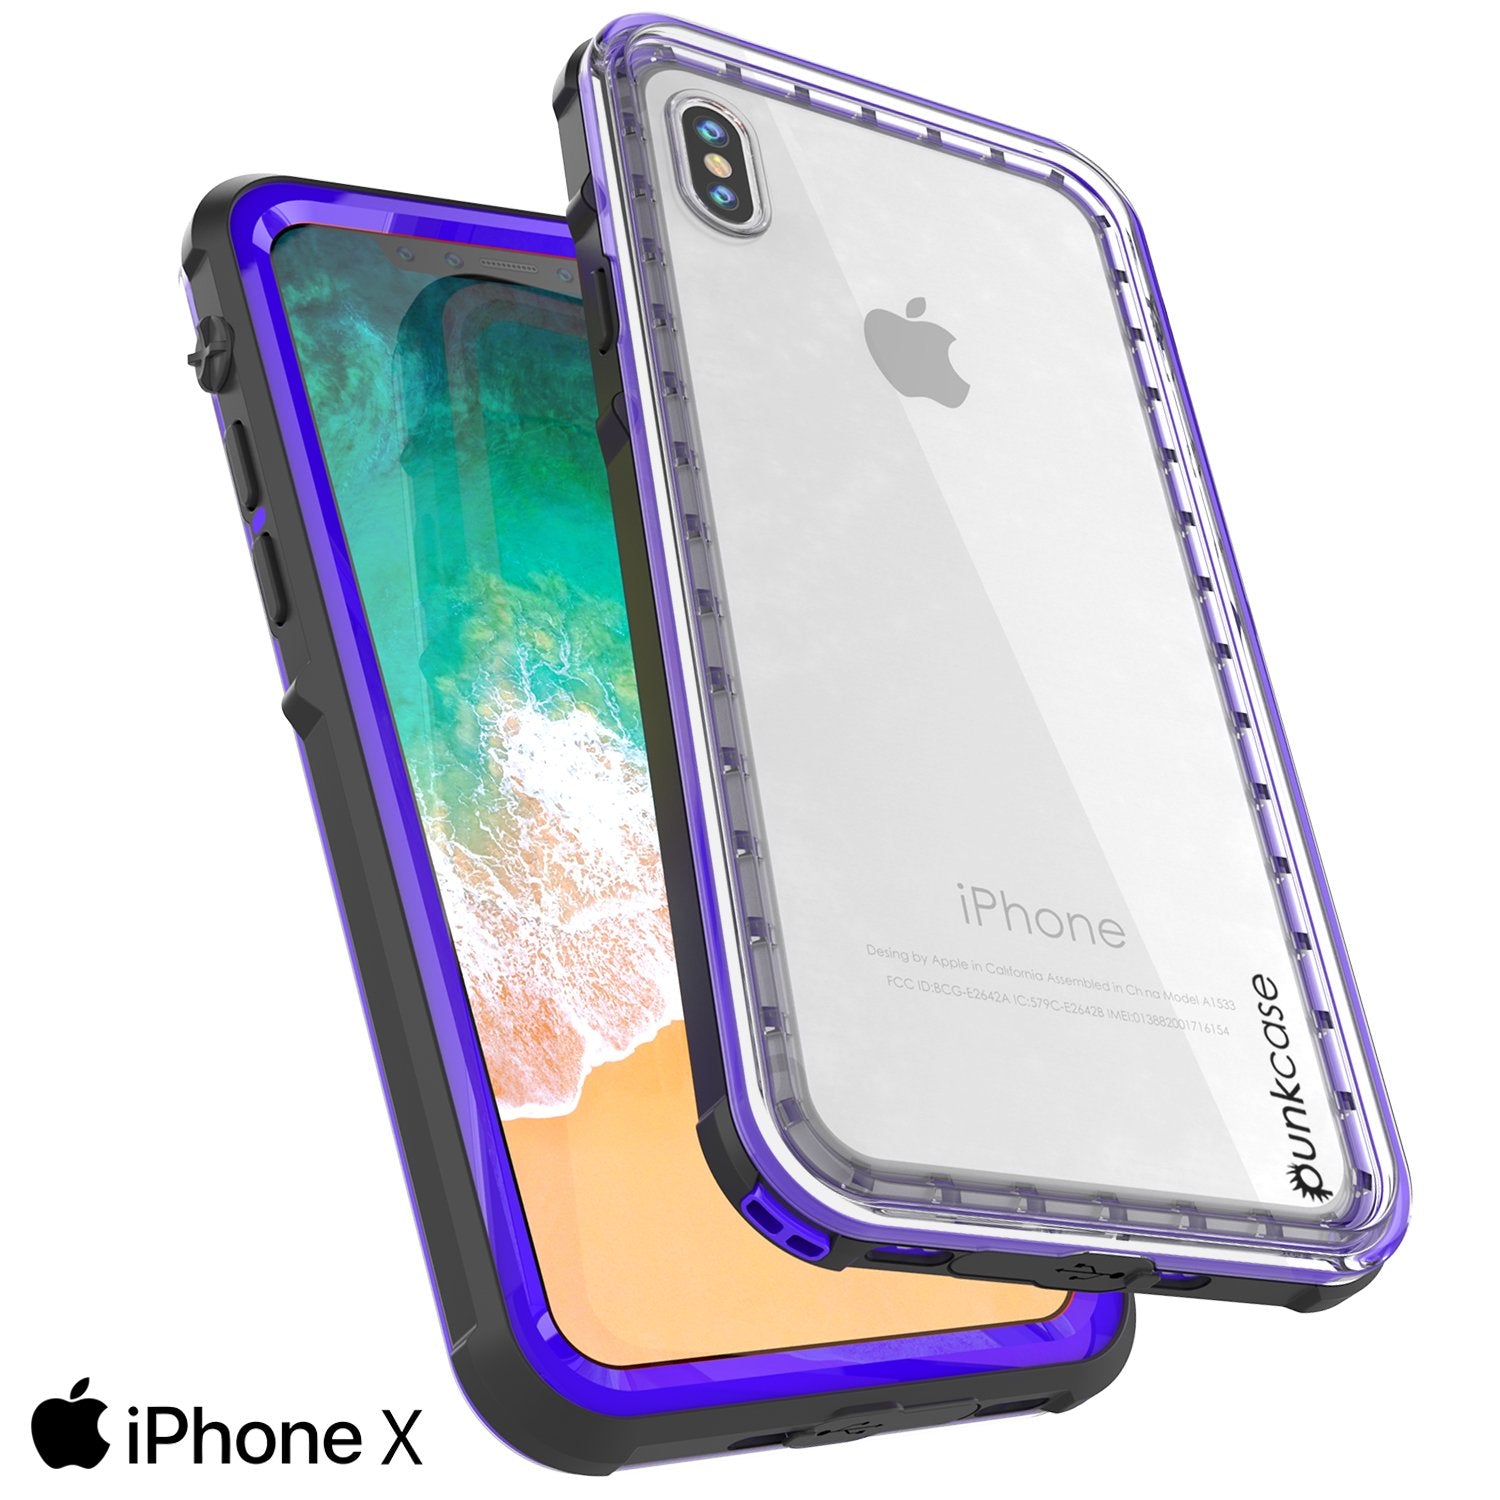 iPhone X Case, PUNKCase [CRYSTAL SERIES] Protective IP68 Certified Cover W/ Attached Screen Protector - DustPROOF, ShockPROOF, SnowPROOF - Ultra Slim Fit for Apple iPhone 10 [PURPLE]